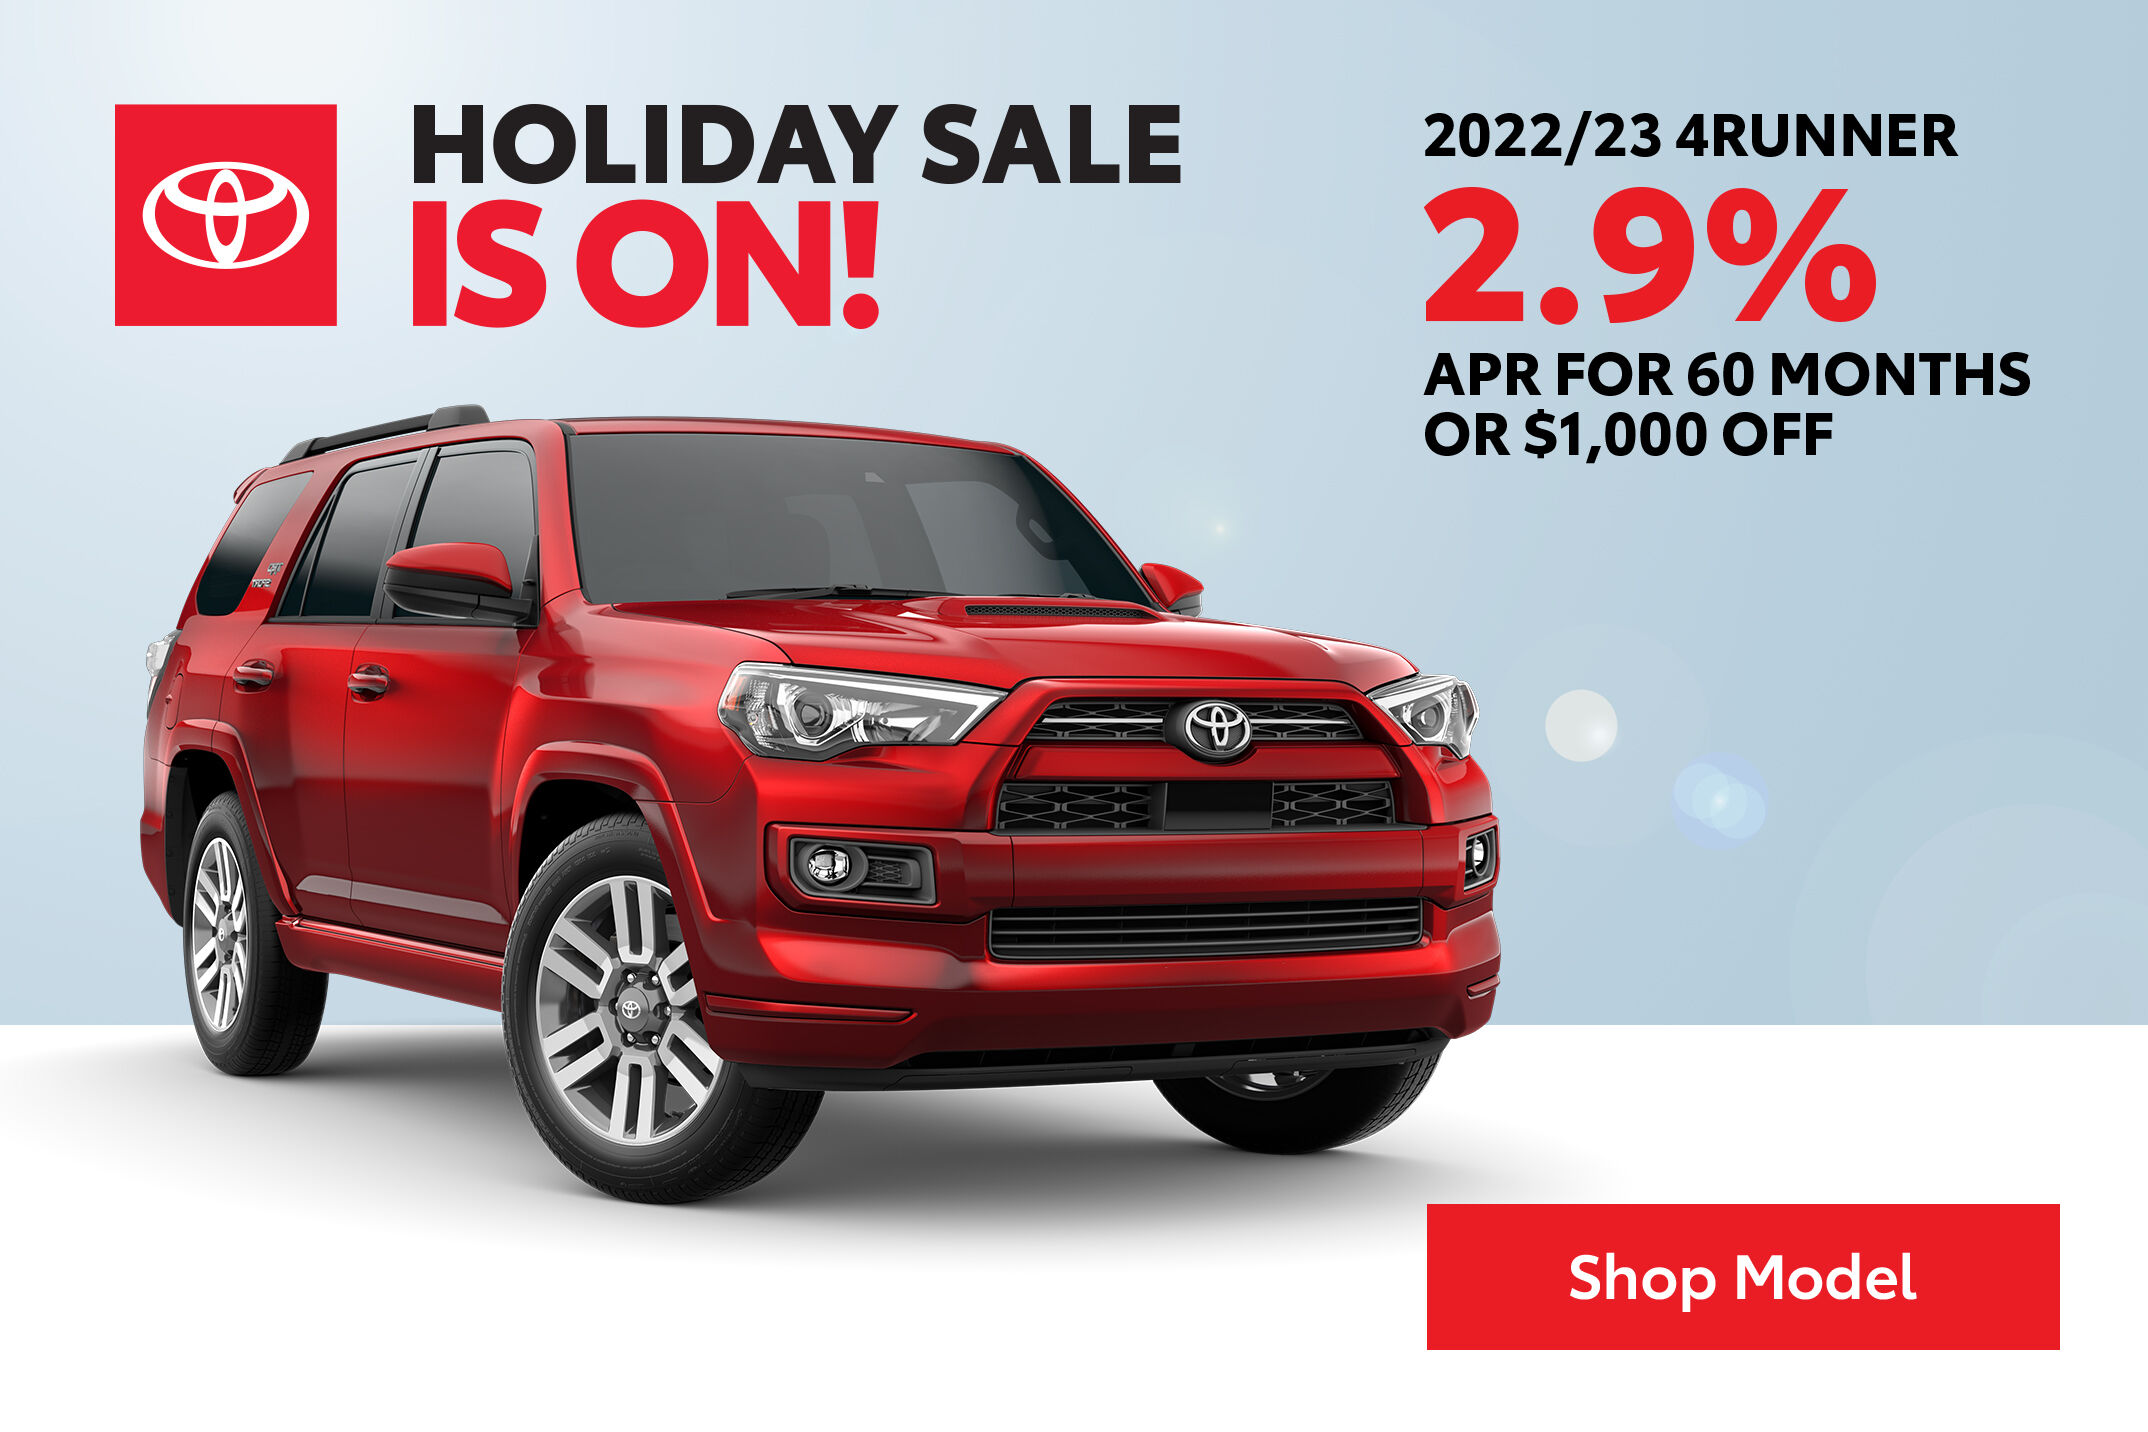 Holiday Sale - 2022 & 2023 4Runner - 2.9% APR for 60 months or $1,000 off